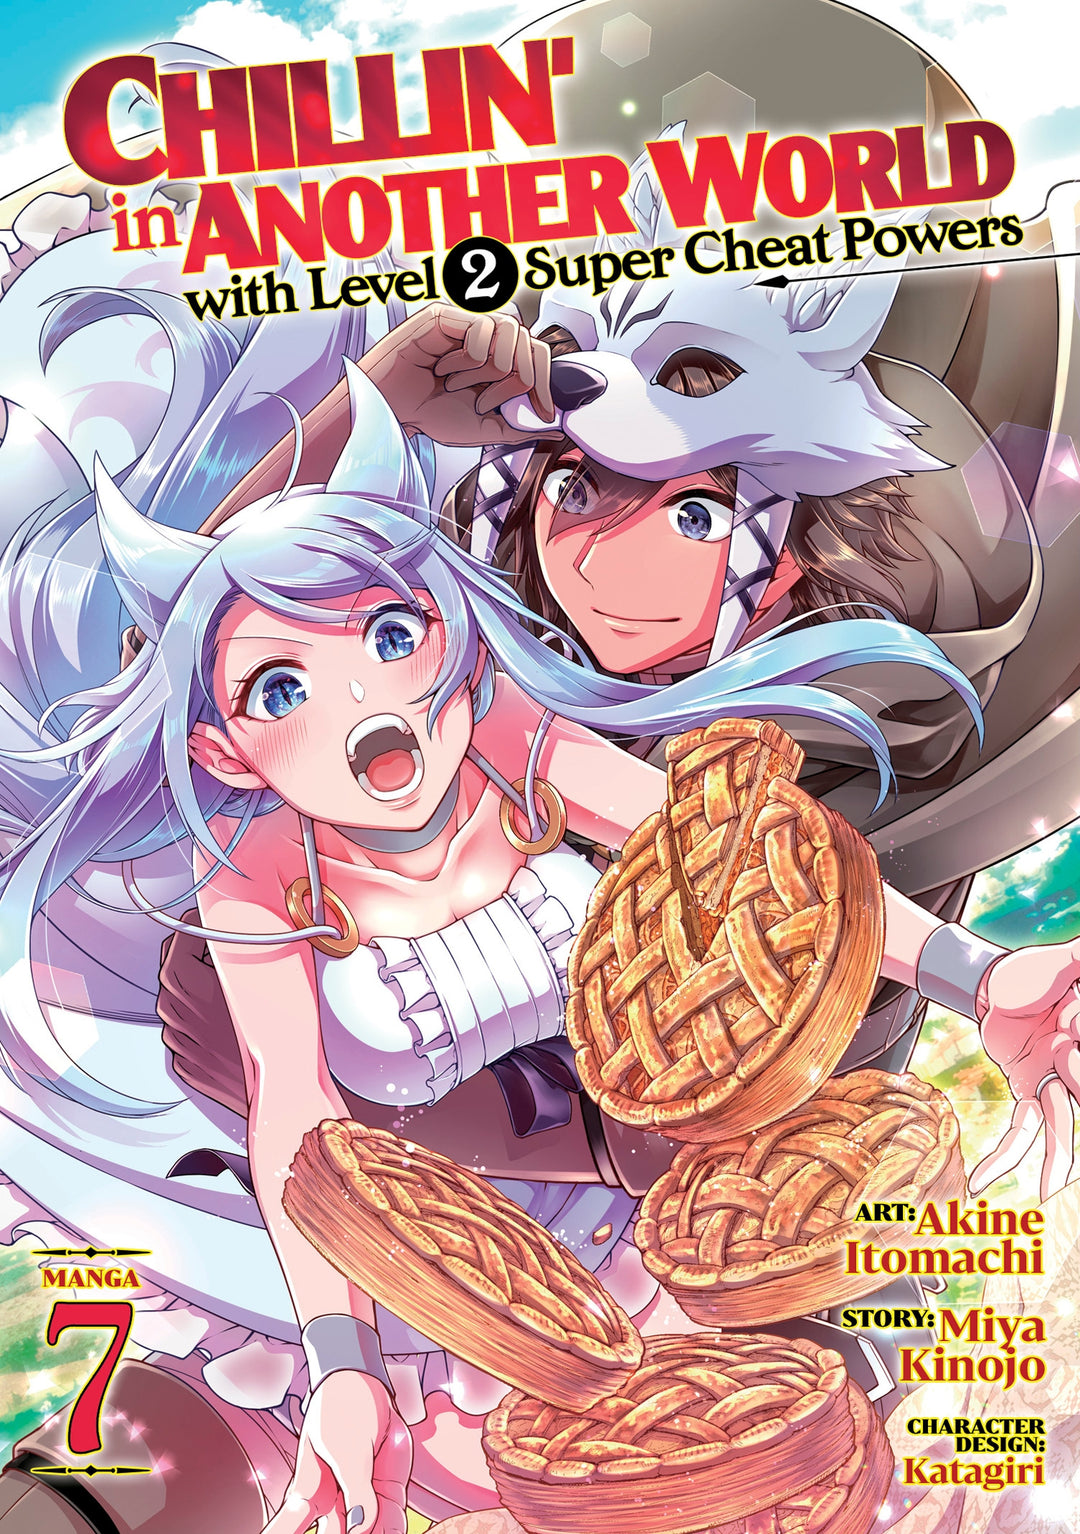 Chillin' in Another World with Level 2 Super Cheat Powers (Manga), Vol. 07